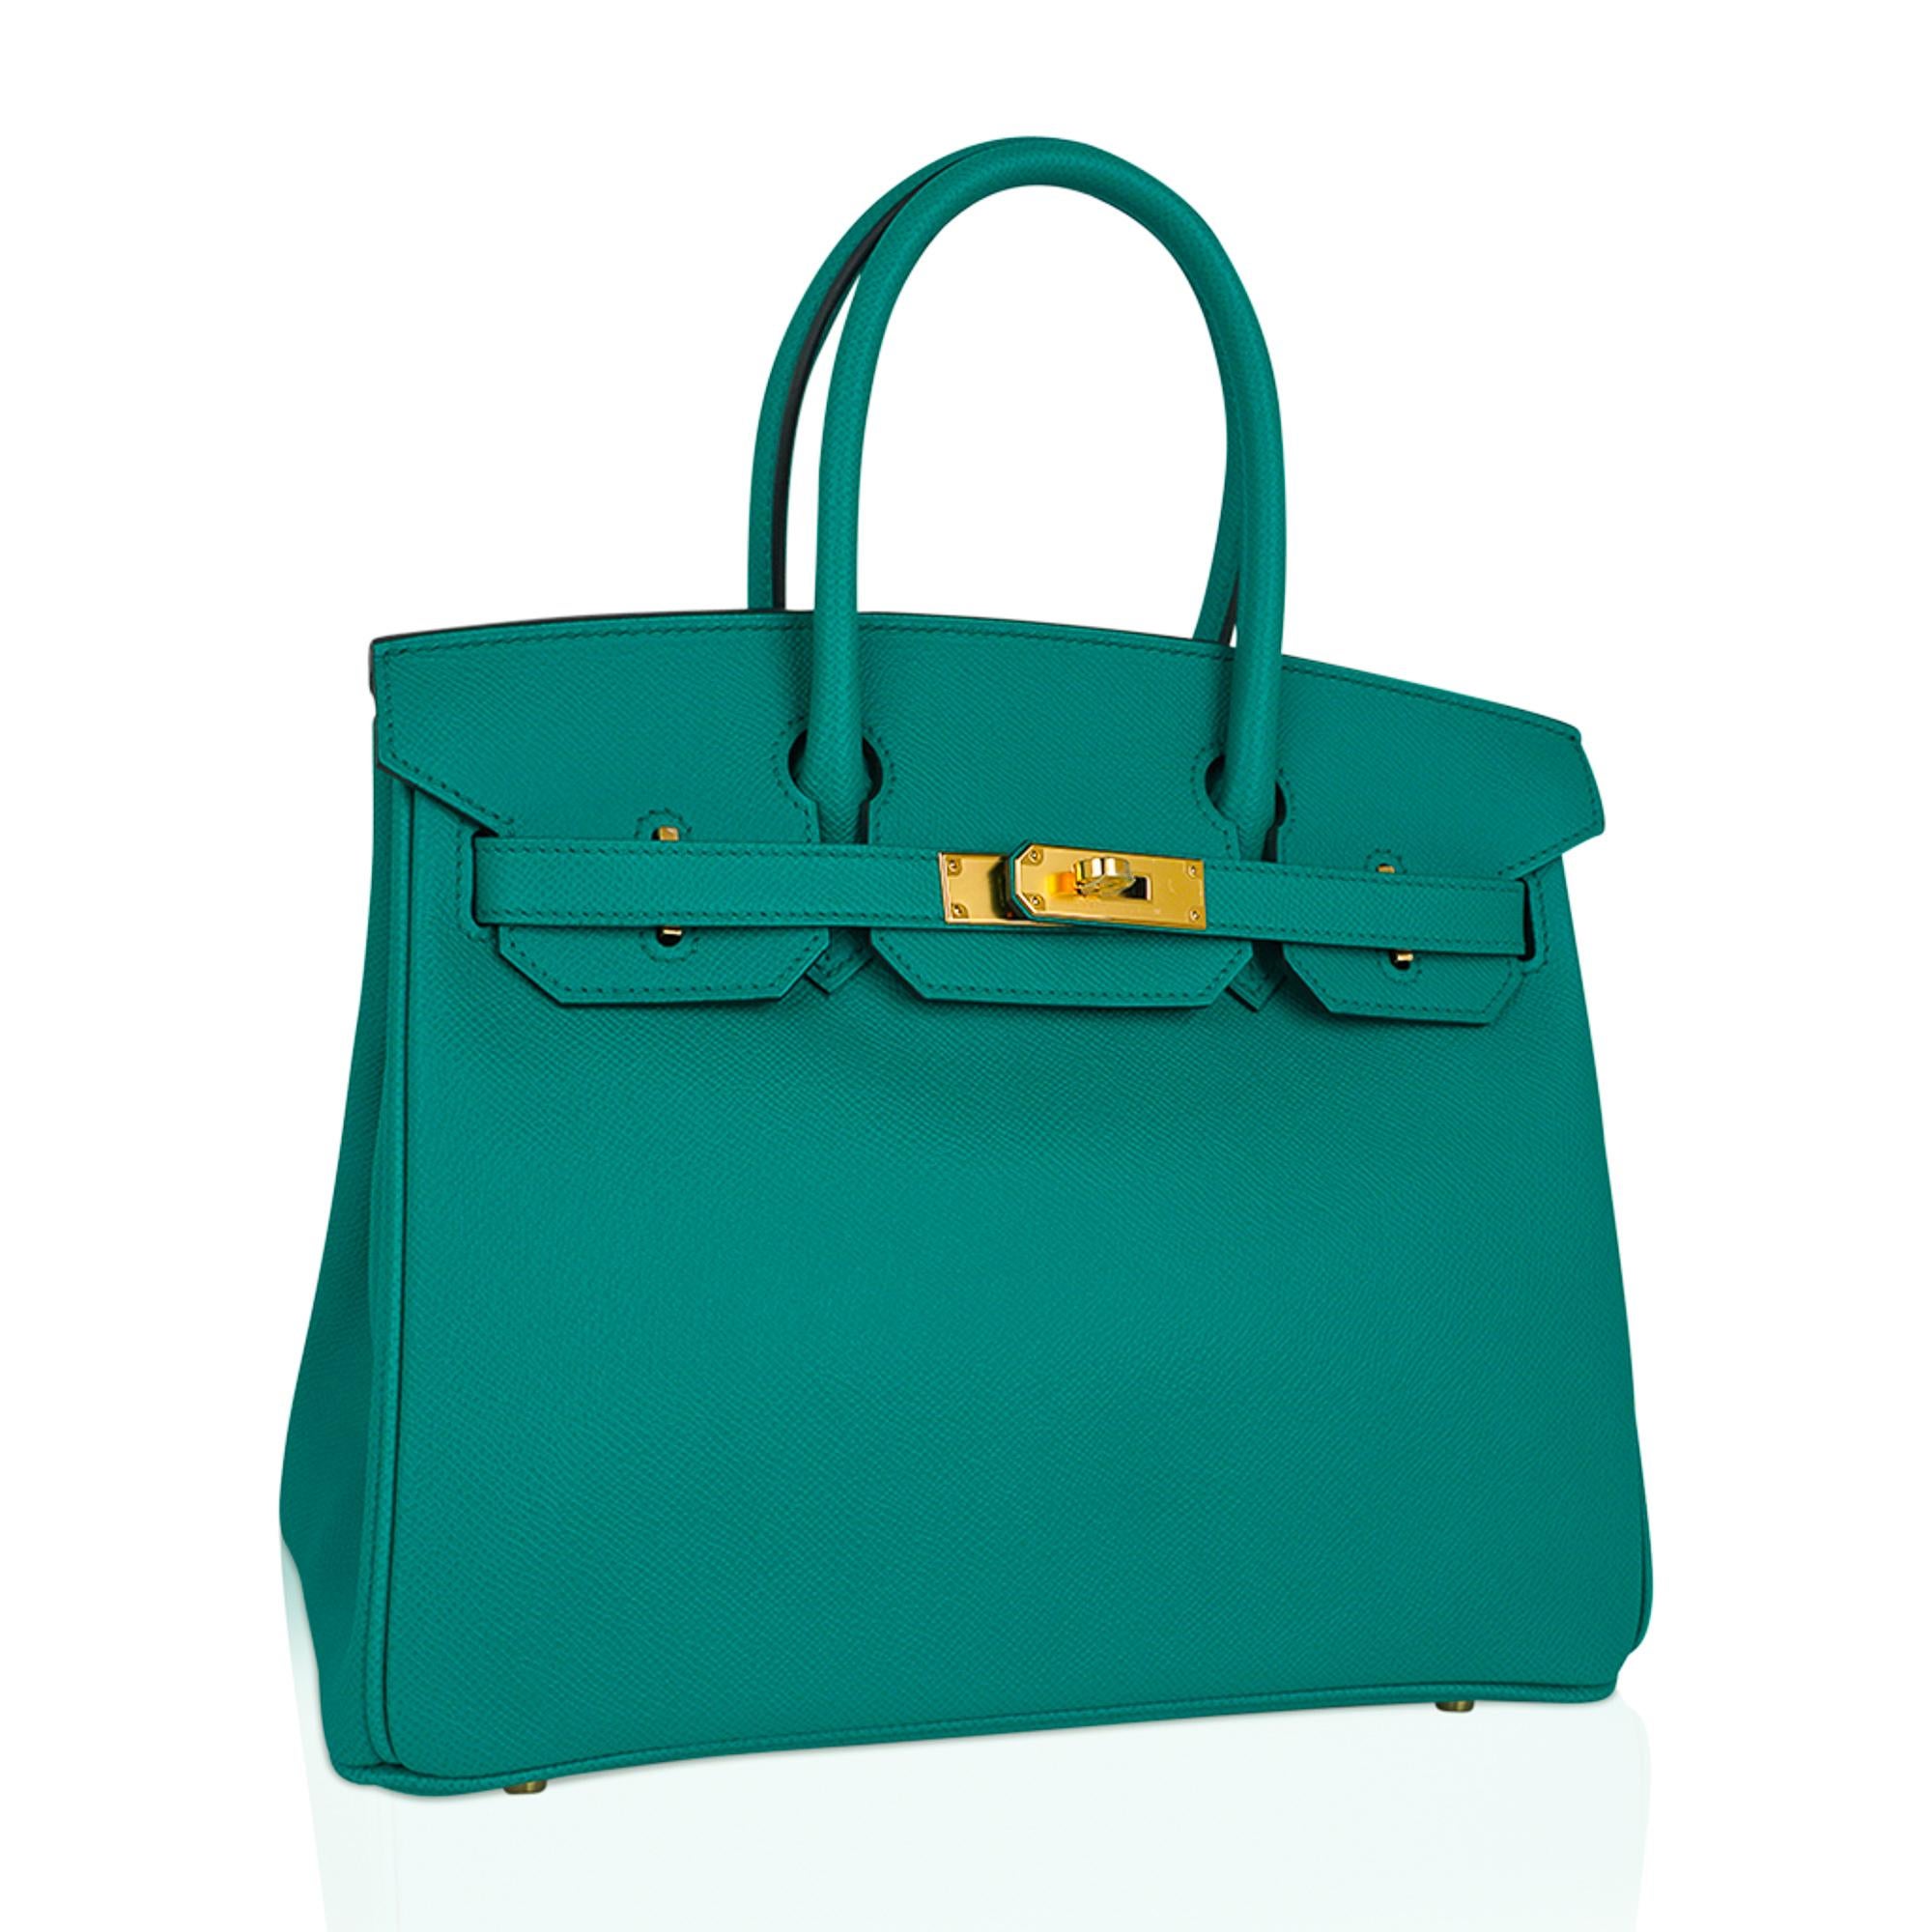 Mightychic offers an Hermes Birkin 30 bag featured in exquisite Vert Jade.
Epsom leather with rich gold hardware accentuates the beautiful colour of this Birkin bag.
This beauty will take you year round.
Comes with the lock and keys in the